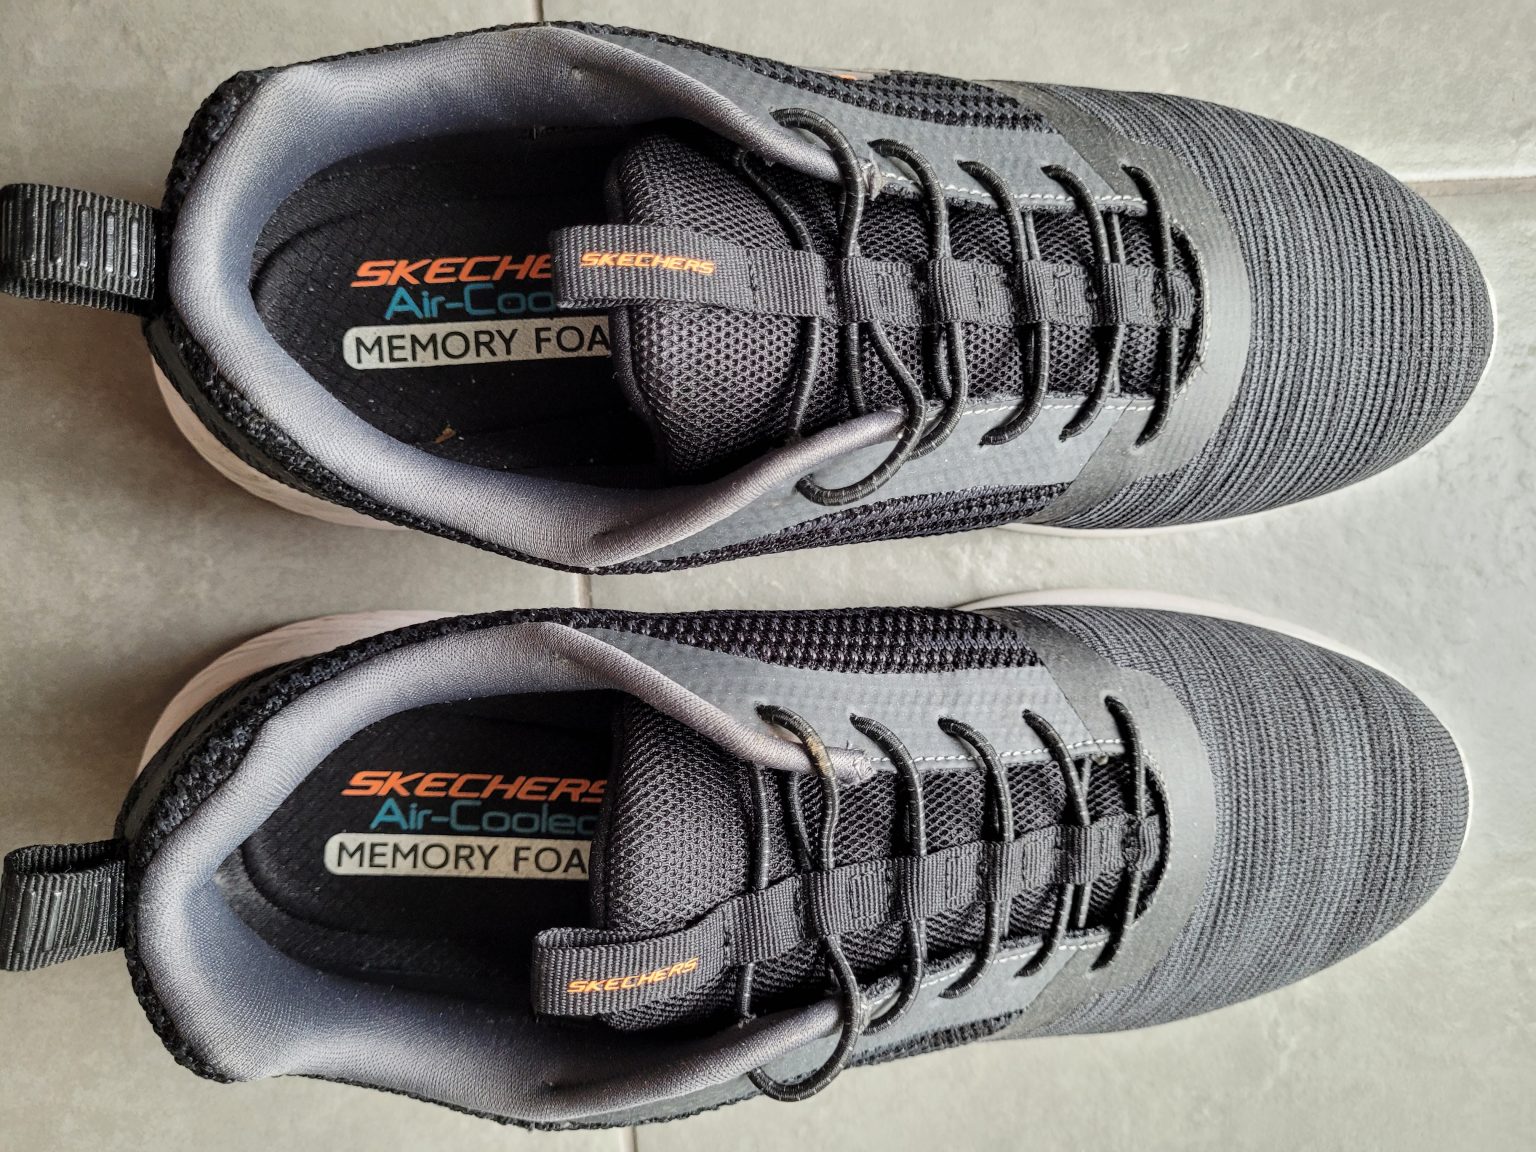 How To Clean Skechers Shoes? - The Men Hero